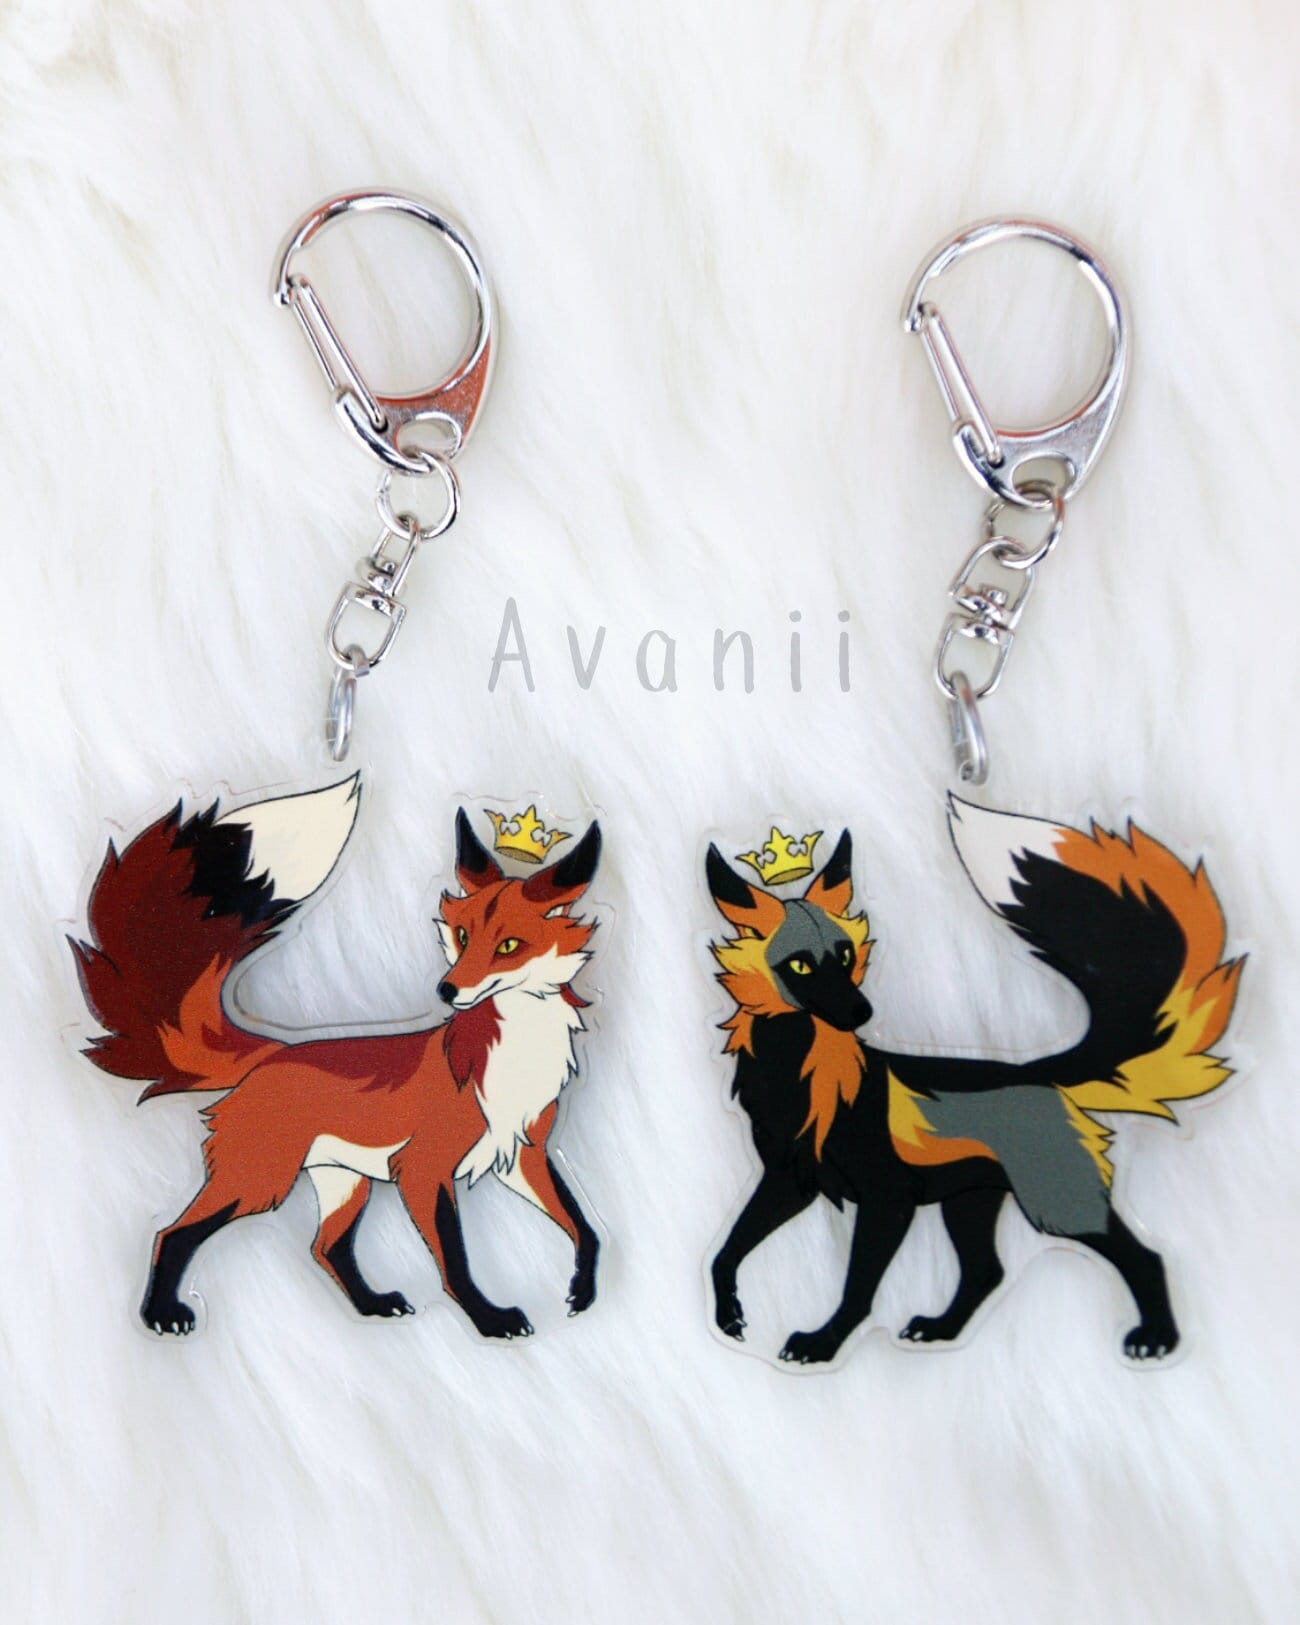 Caboodle Collar or Keychain Charm — Fox Named Todd